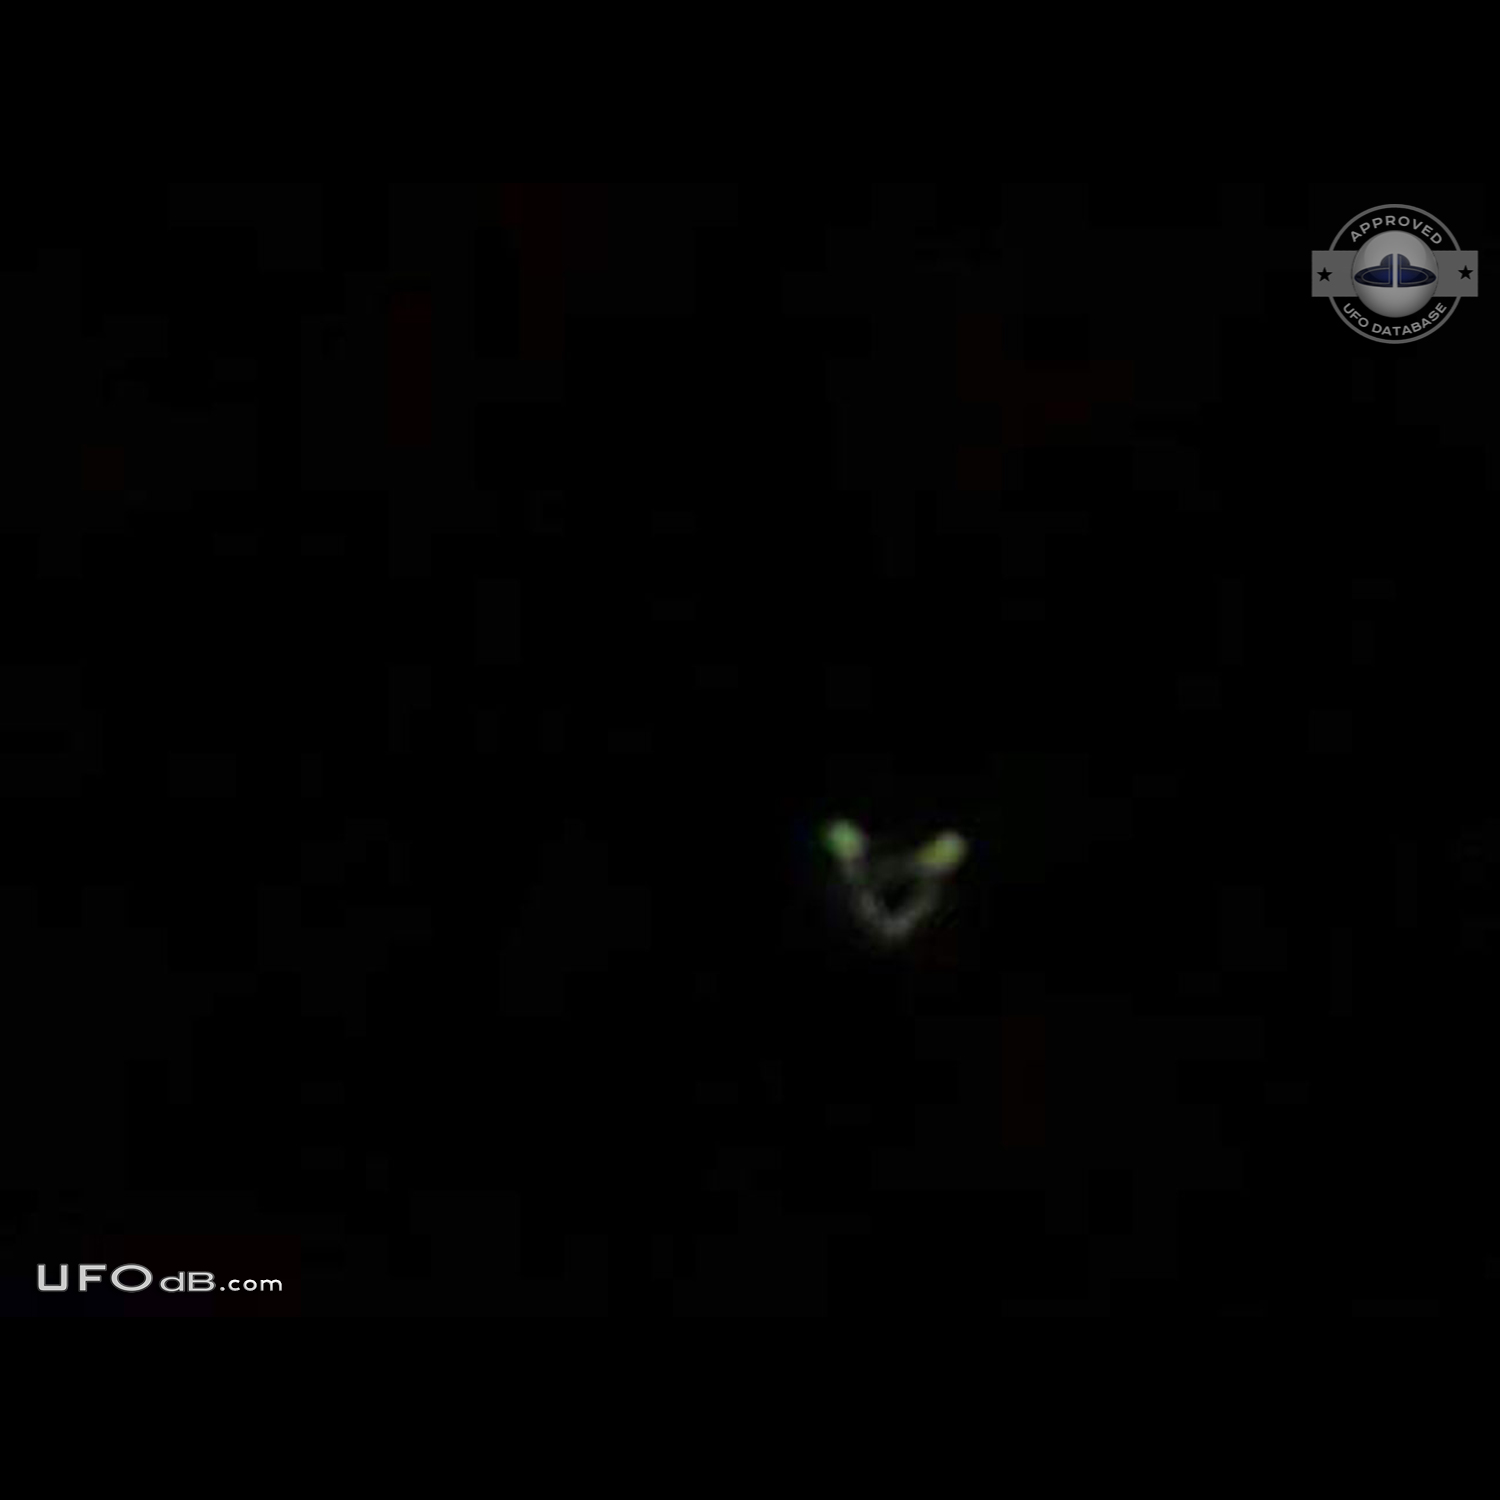 Silent UFO seen near woodland area Huddersfield UK on May 2011 UFO Picture #641-1